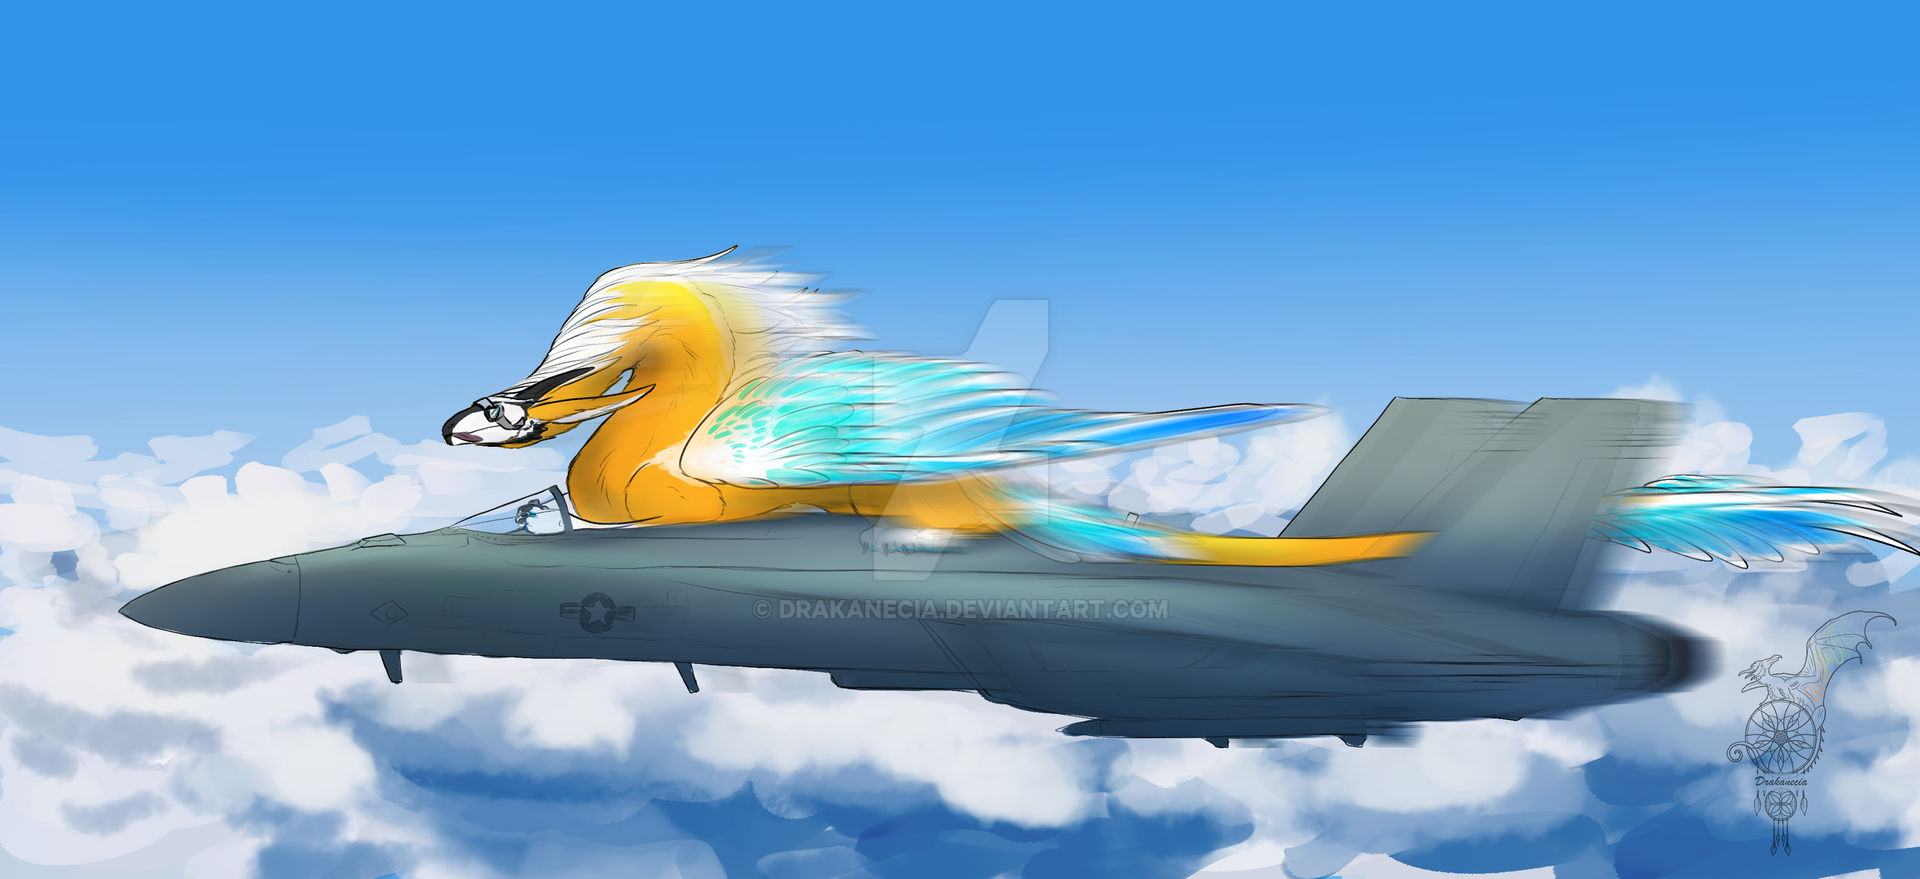 its_a_bird___its_a_plane___both__it_is_both__by_drakanecia_dfyh9pr-fullview.jpg